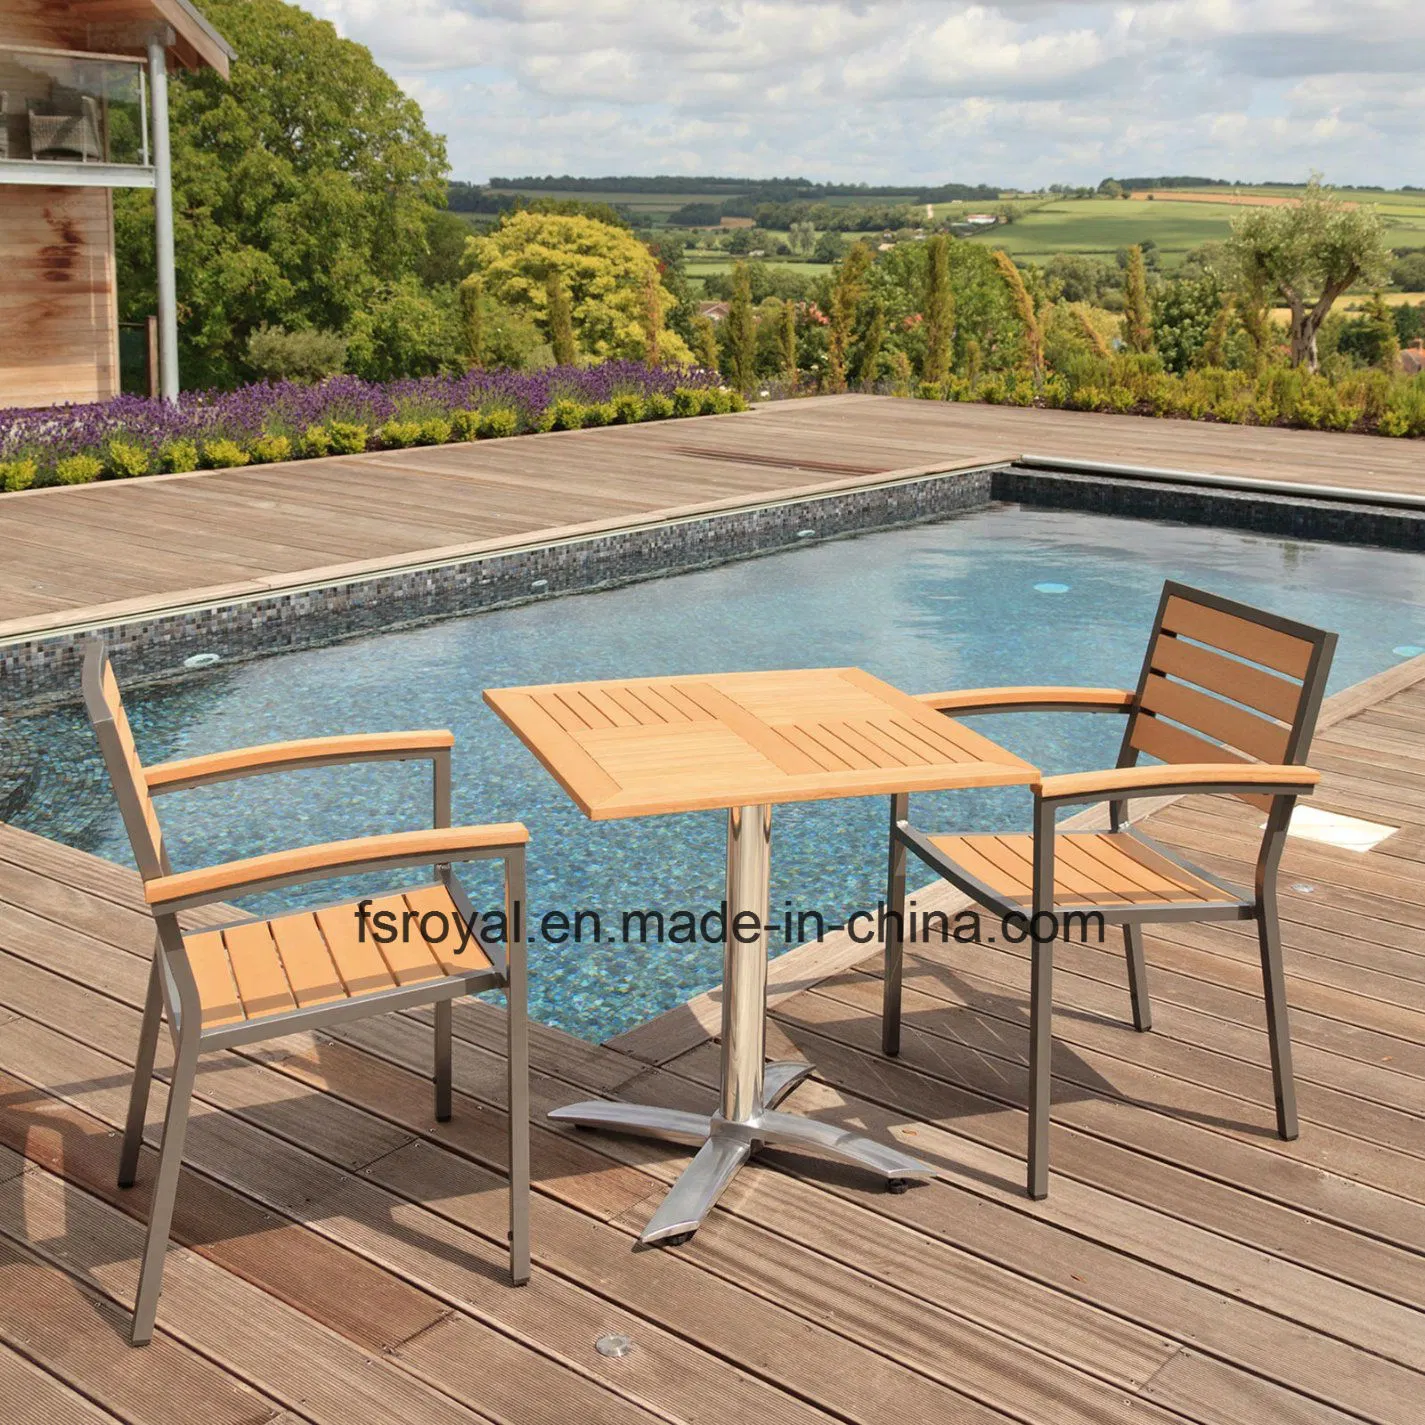 Functional Garden Furniture Set Outdoor Dining Table and Chair Patio Furniture